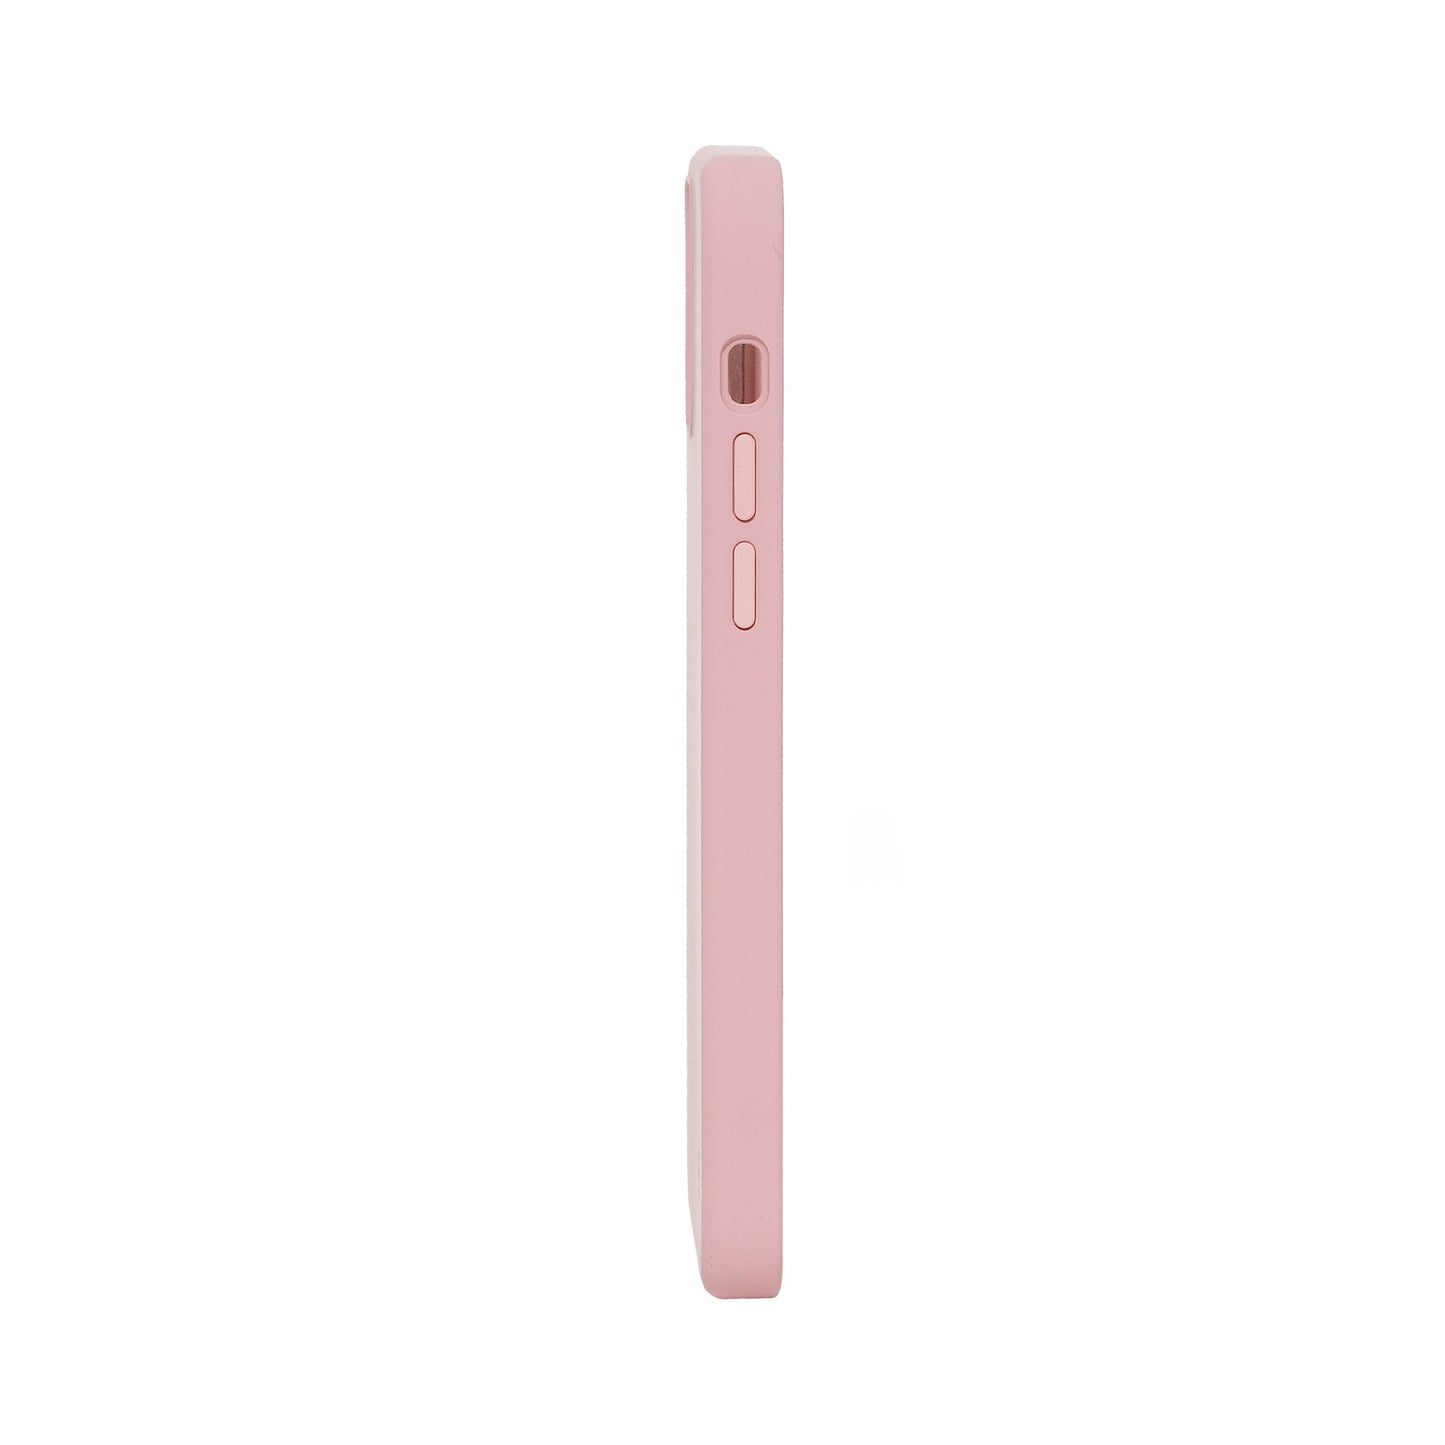 BEFORE ANYTHING ELSE Terra Fine Silicone Case for iPhone 12/12 Pro - Pink